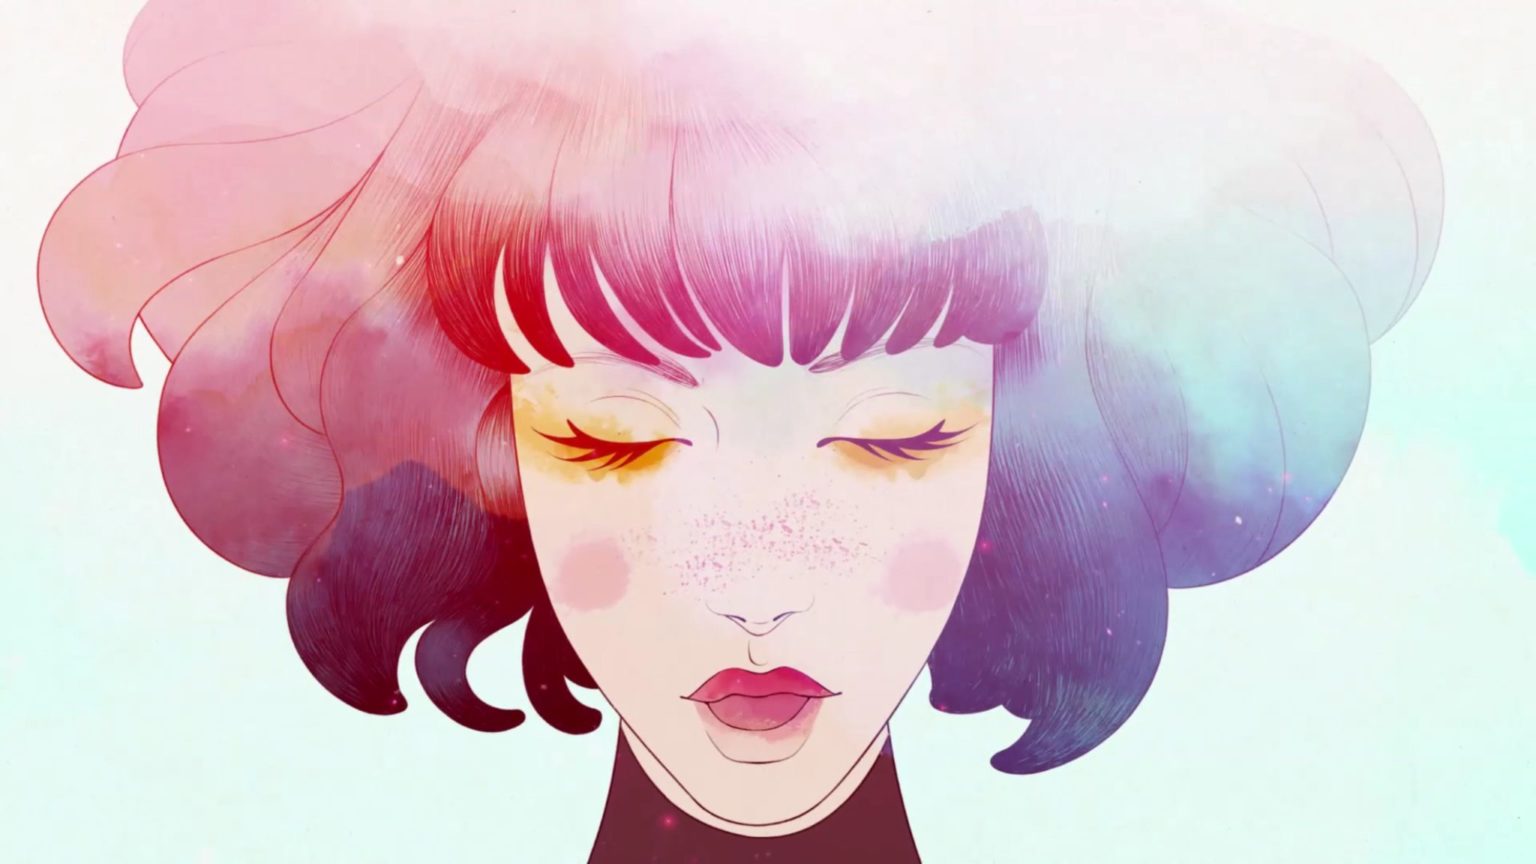 Gris from the indie platformer, Gris